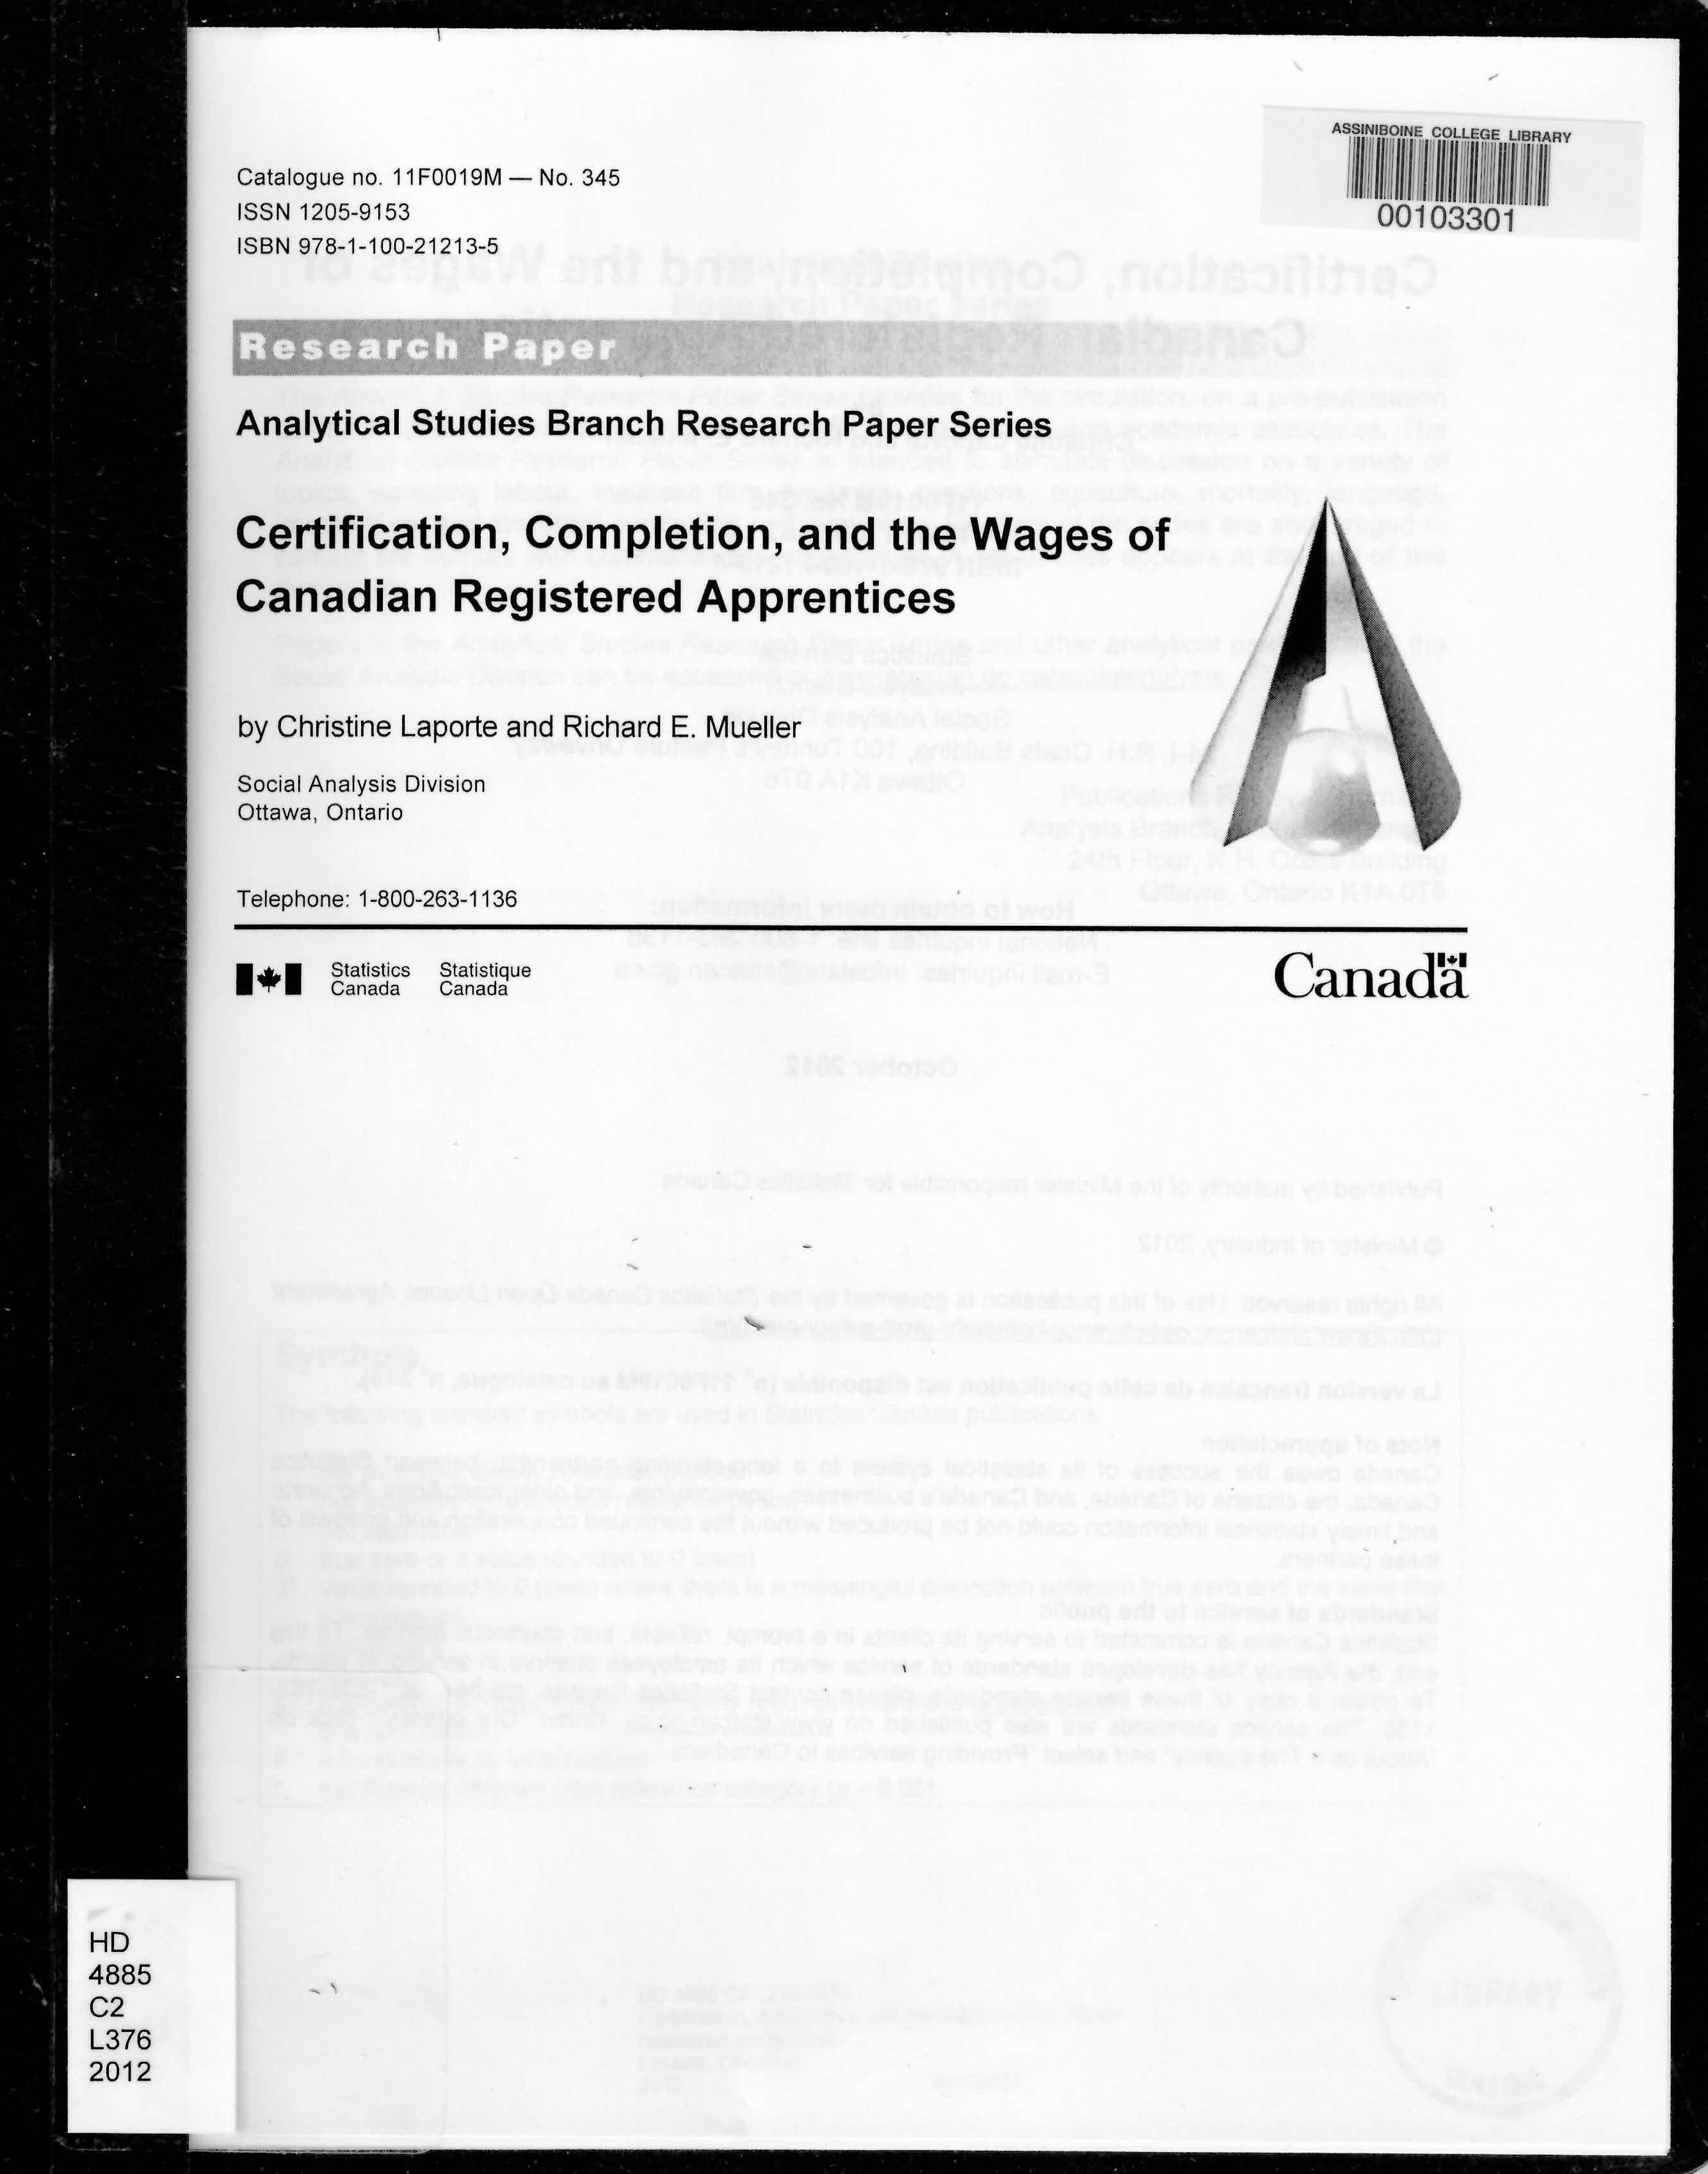 Certification, completion, and the wages of Canadian registered apprentices